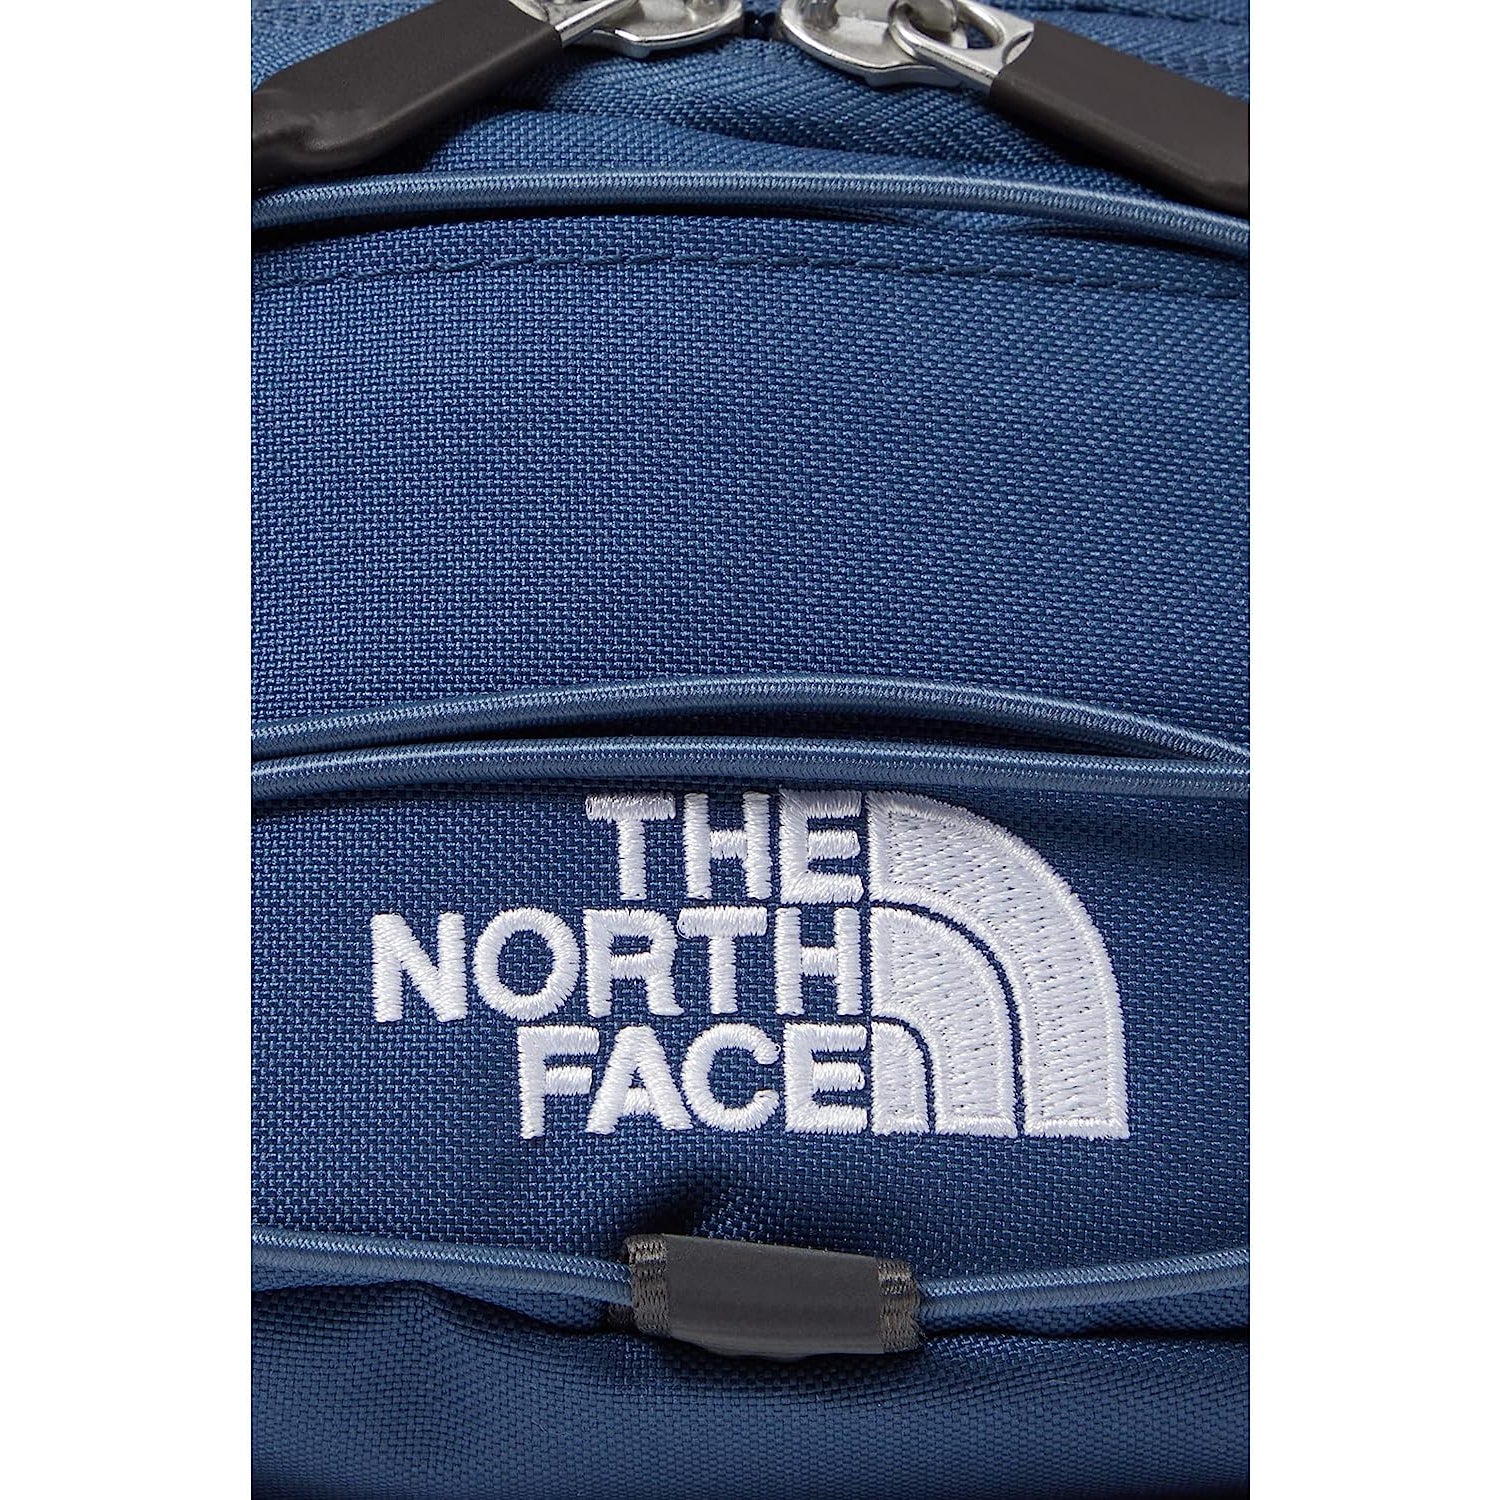 The North Face Jester Lumbar Pack